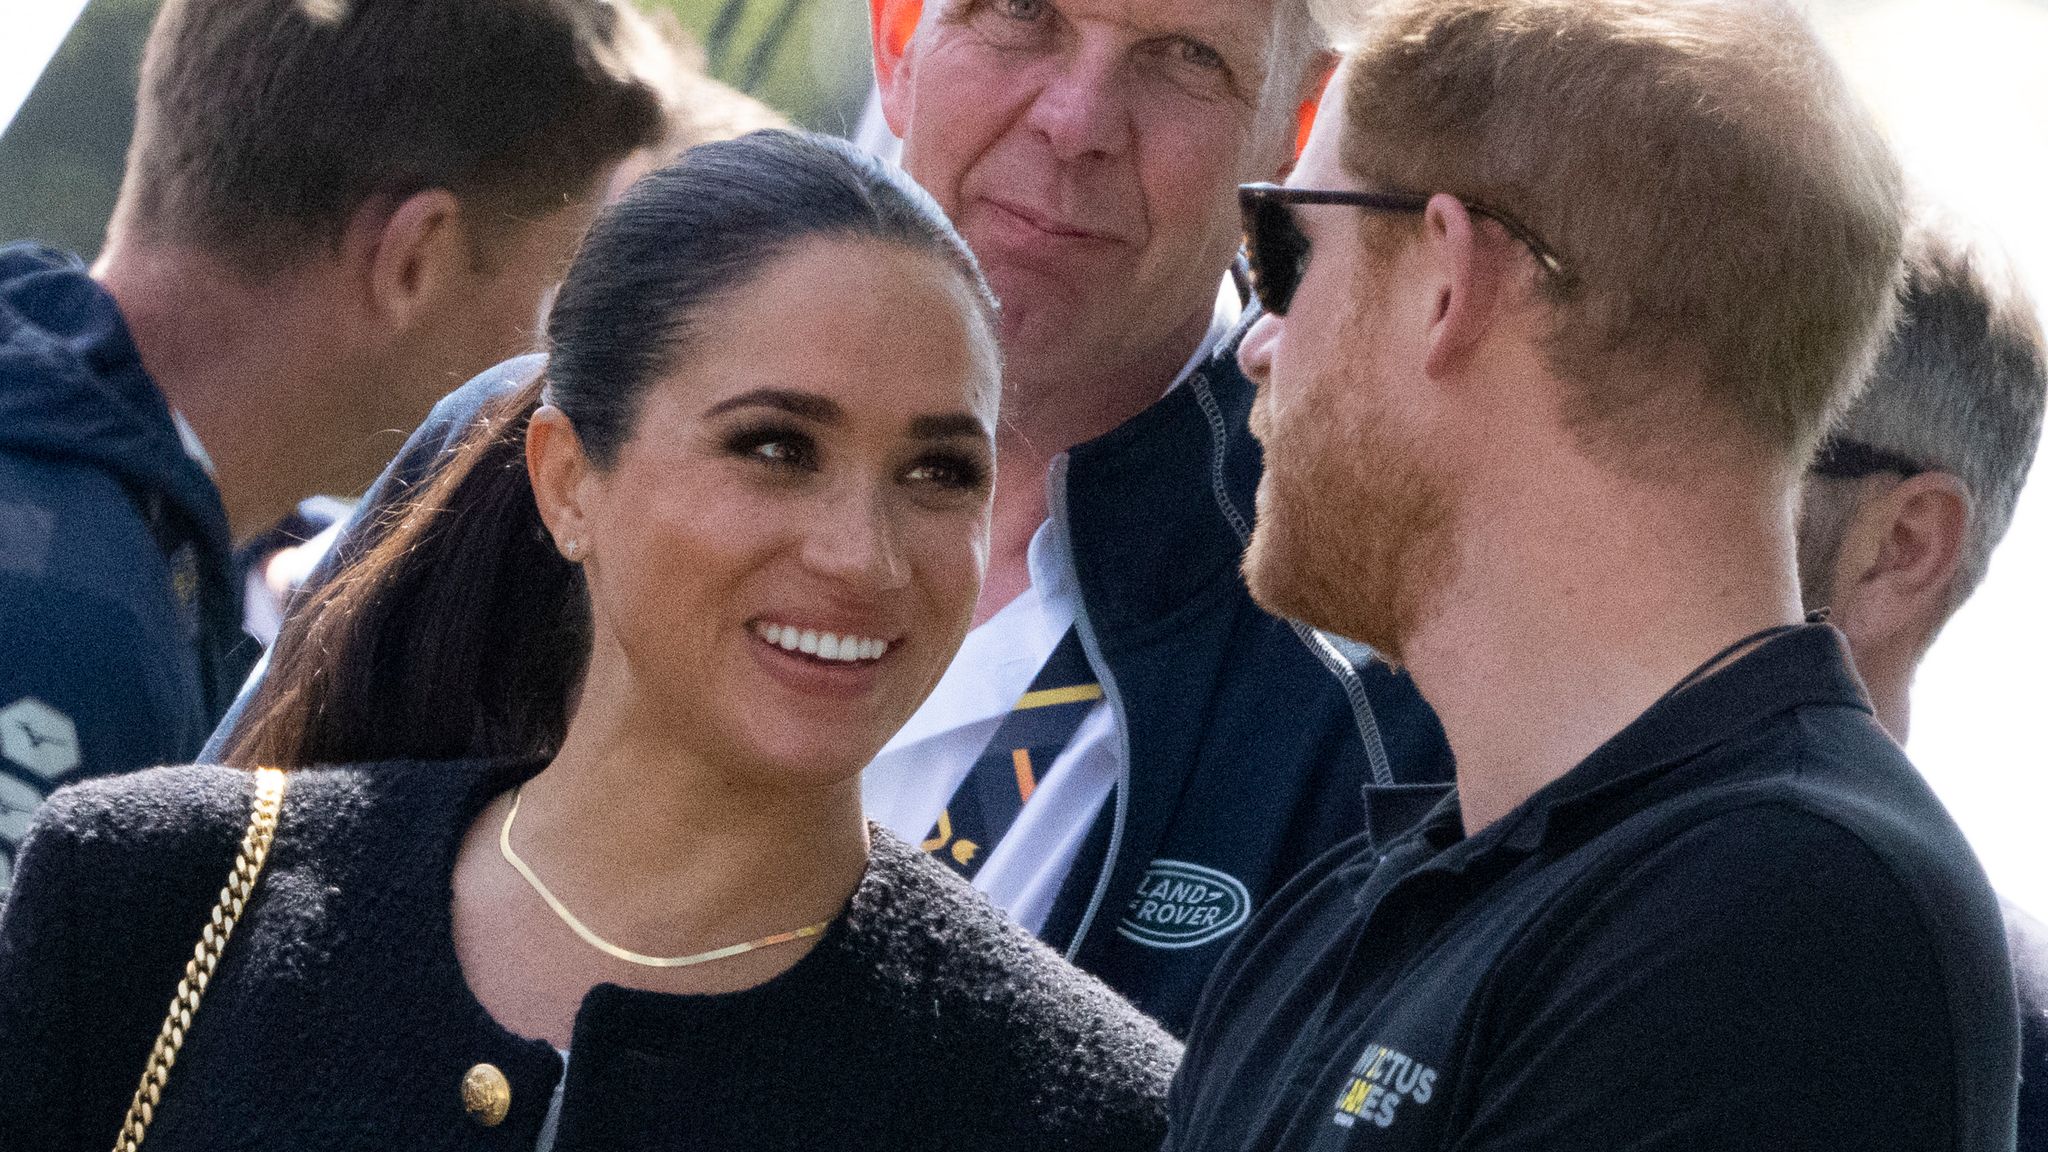 Meghan And Harry In Intimate Display On Stage As Pair Open Invictus Games In The Netherlands